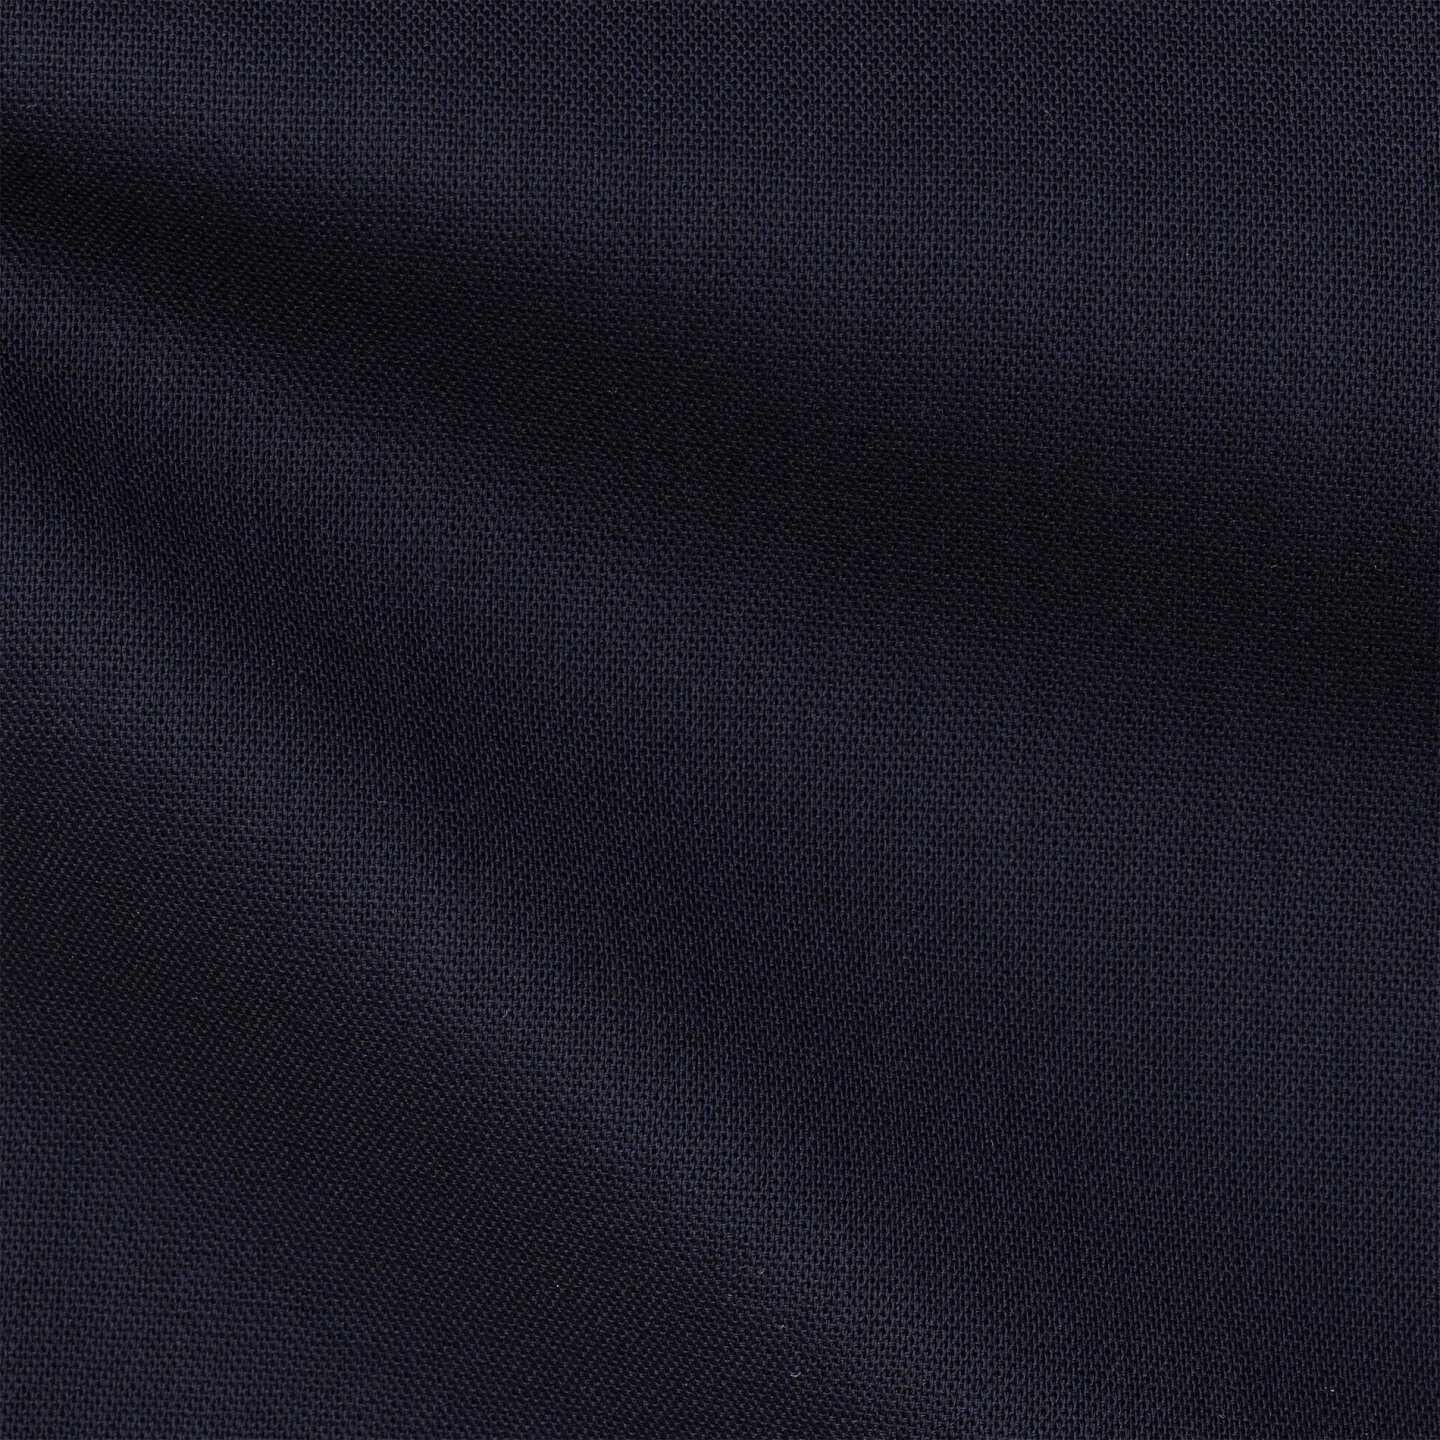 Trousers traveller midnight blue image 4